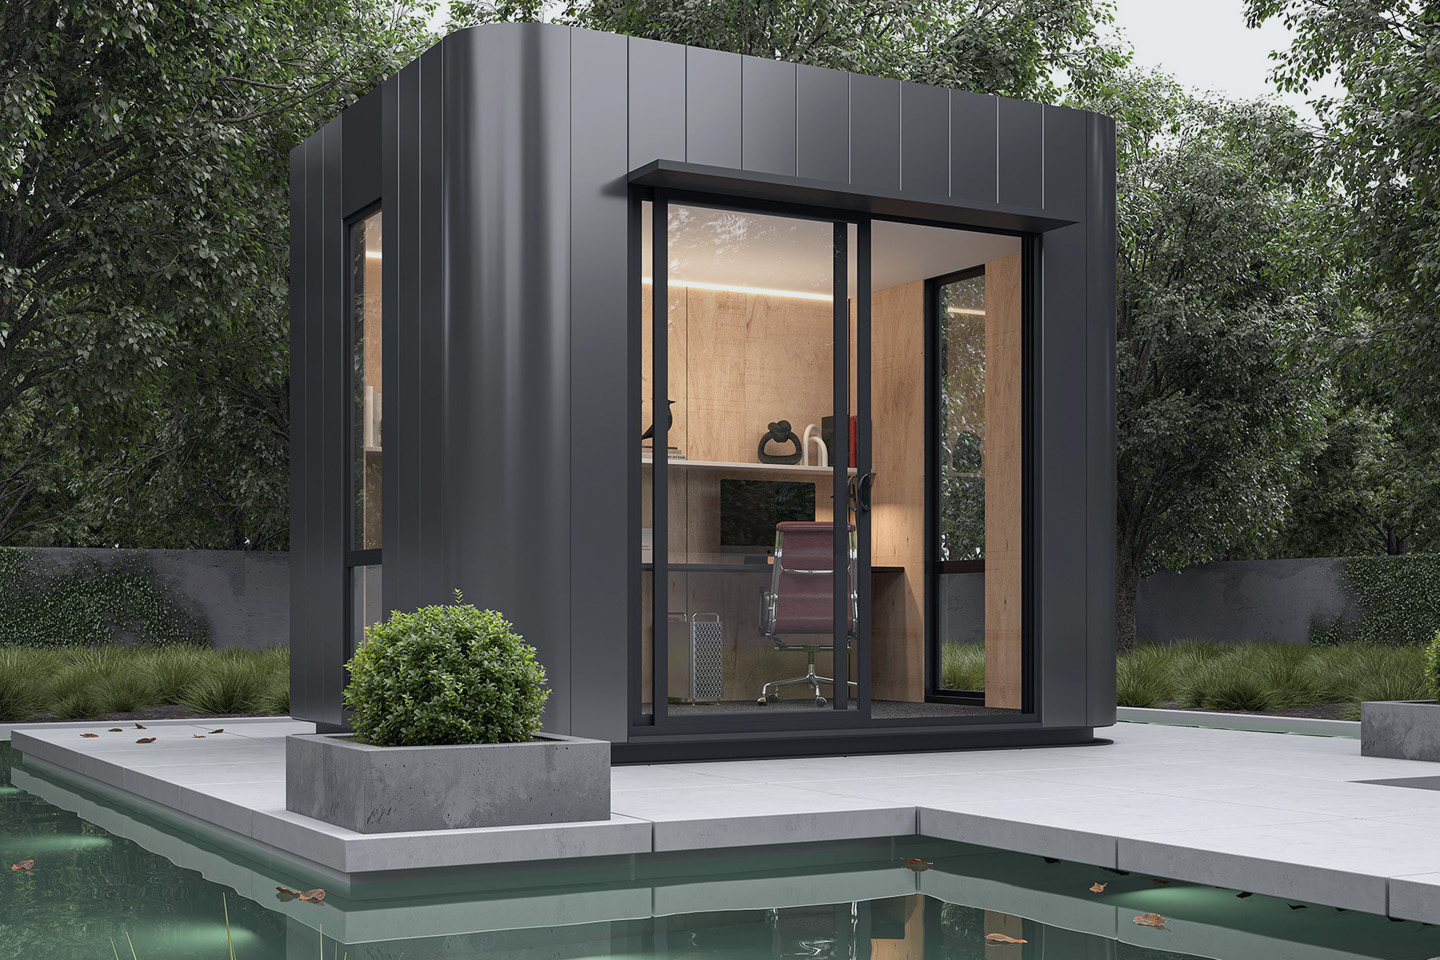 Perfect for a kid's retreat, home office or yoga studio, the backyard pod could be the ideal solution for your family. Image courtesy of Harwyn.